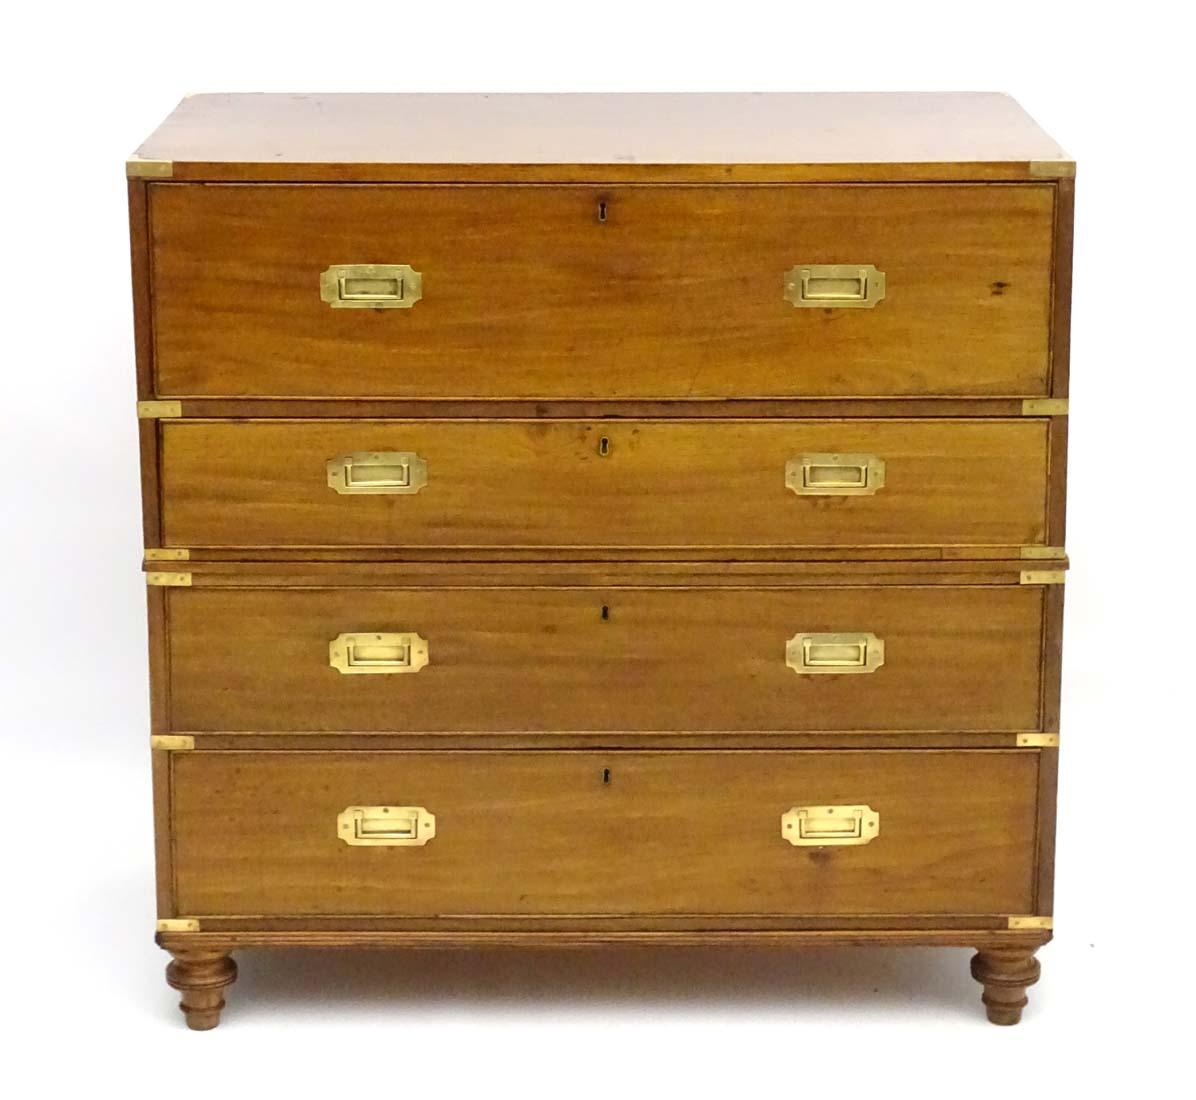 Mid-19th Century Gillows of Lancaster Campaign Chest of Drawers Secretaire Antique, circa 1850